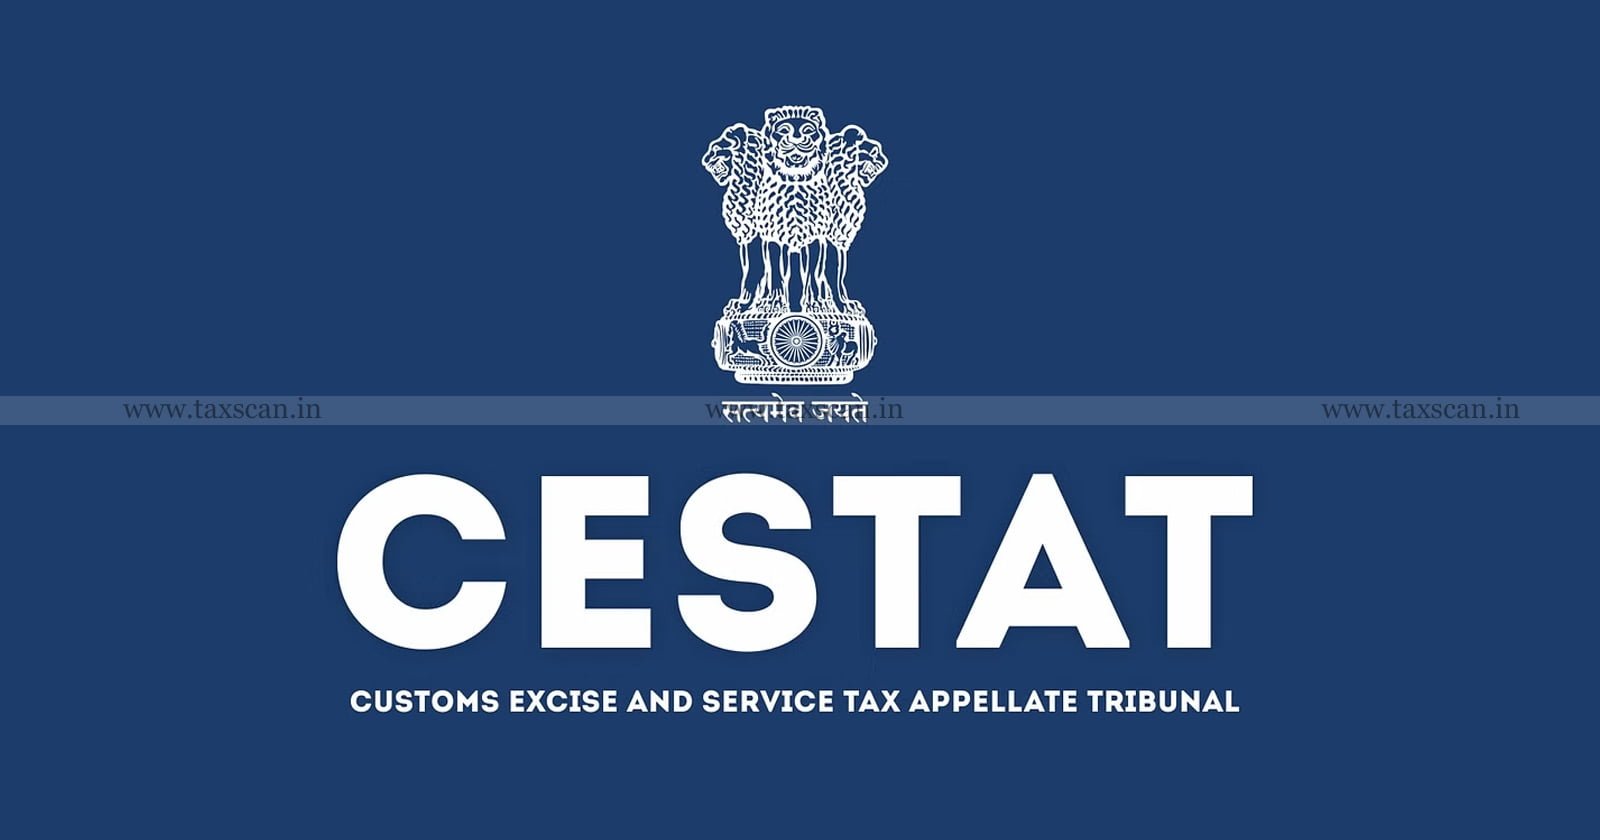 Excise duty refund - CESTAT Bangalore - Appropriation of amount - CESTAT remand - Commissioner scrutiny - taxscan